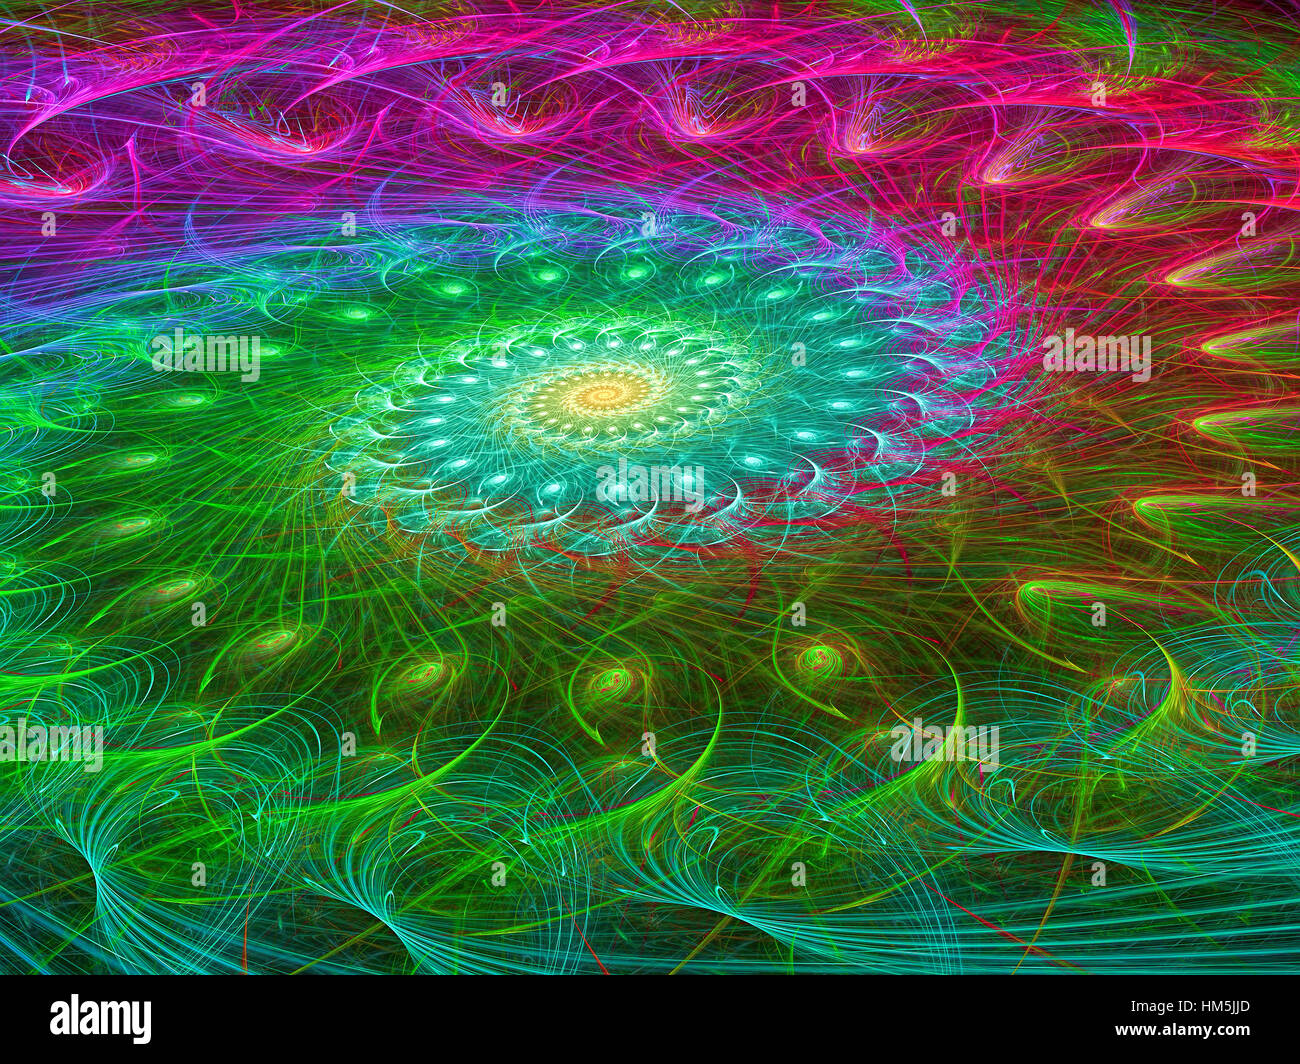 Intricate spiral - abstract digitally generated image Stock Photo